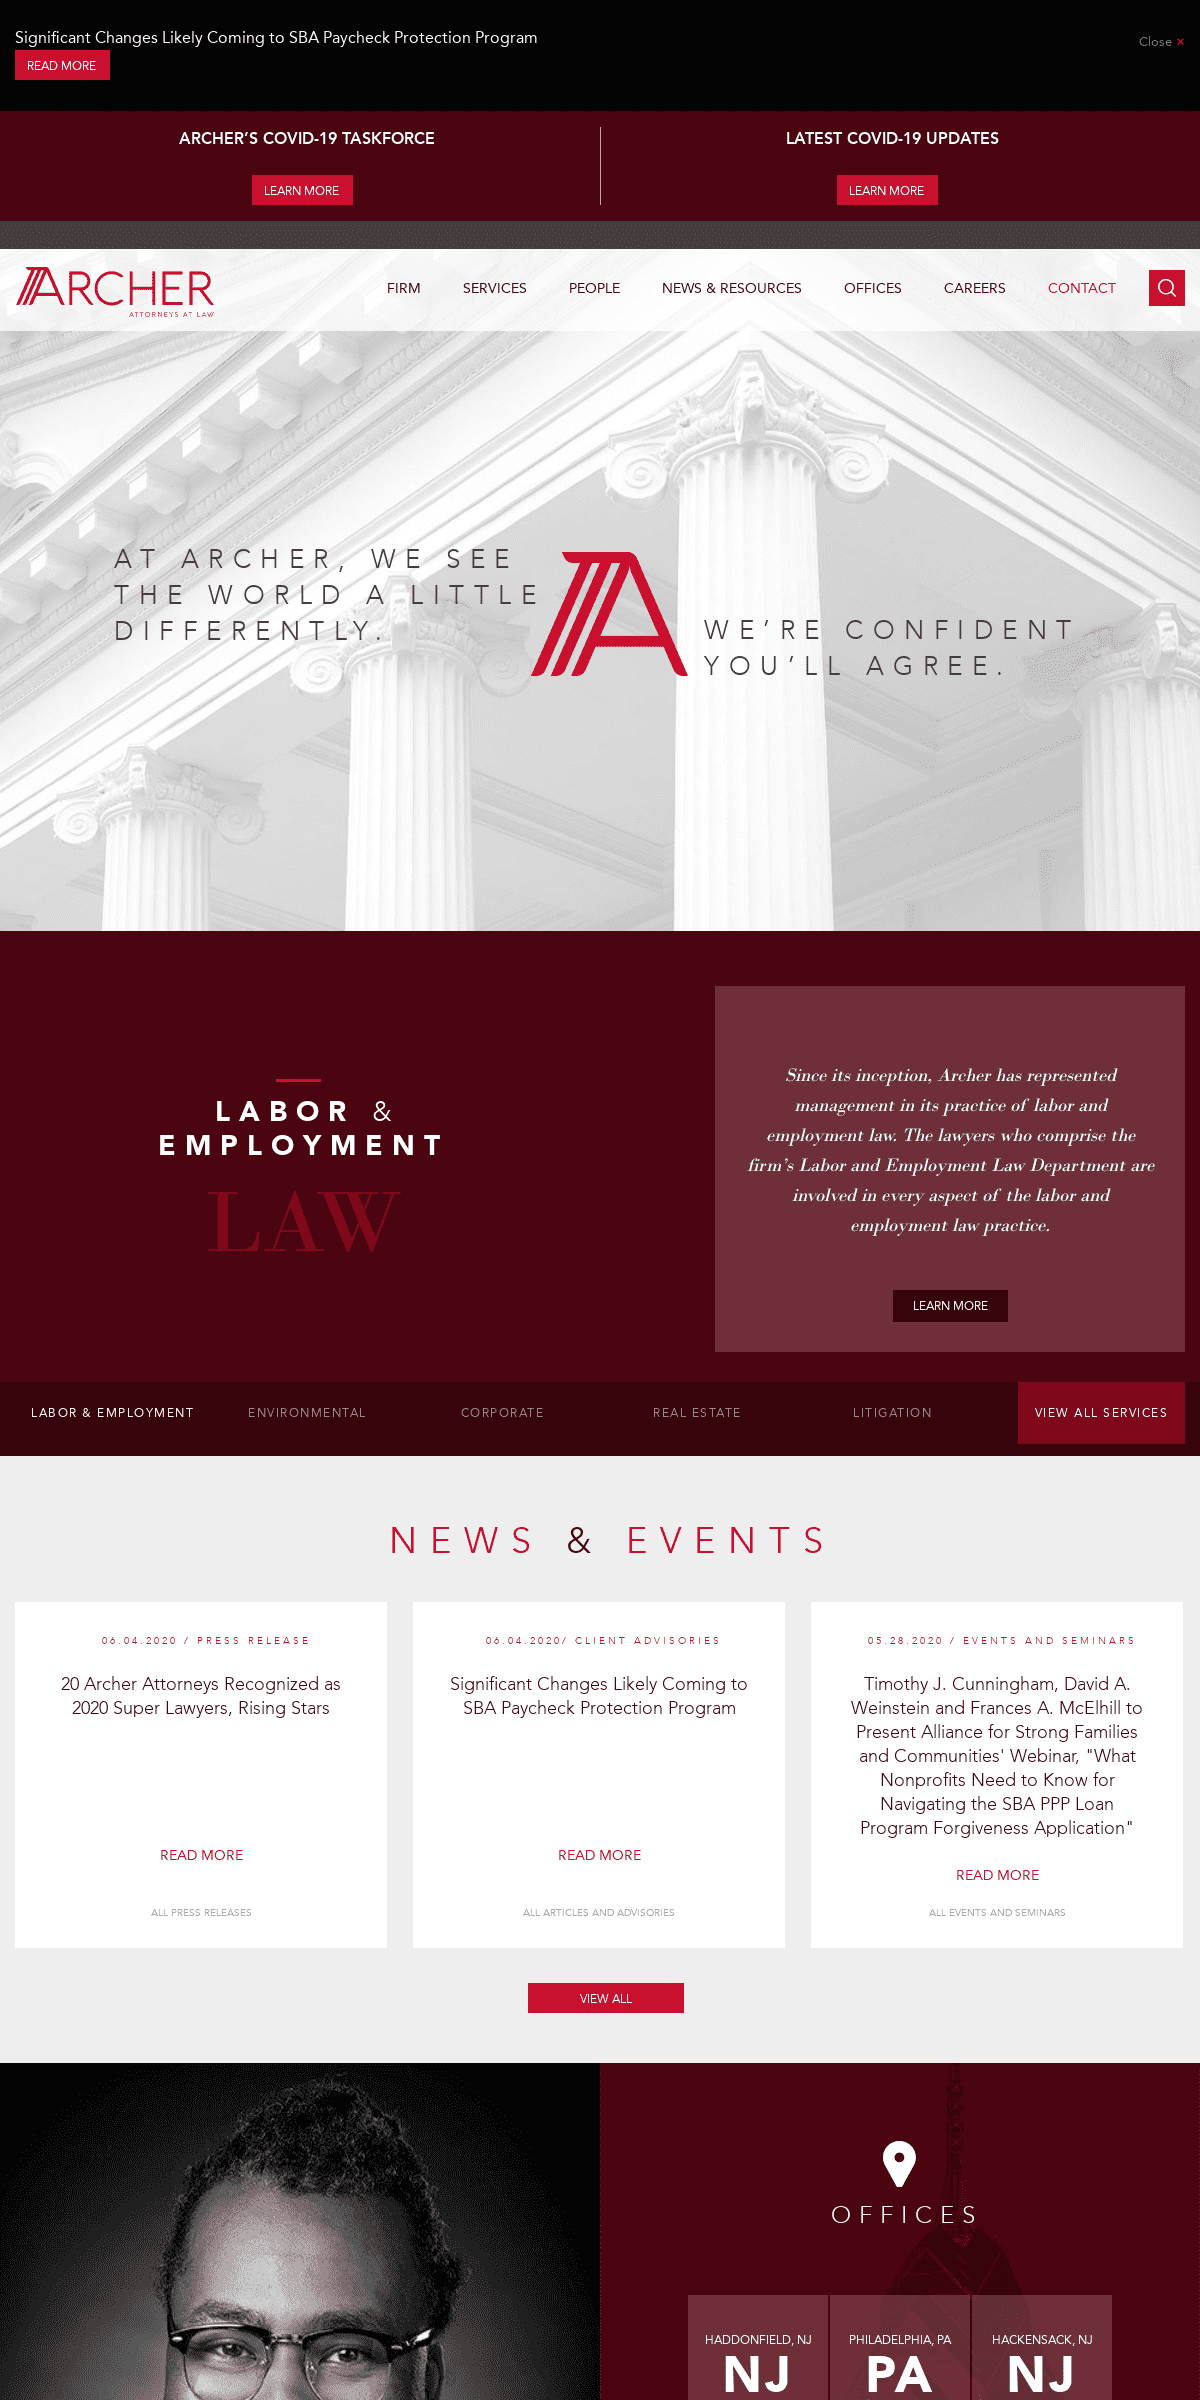 A complete backup of archerlaw.com